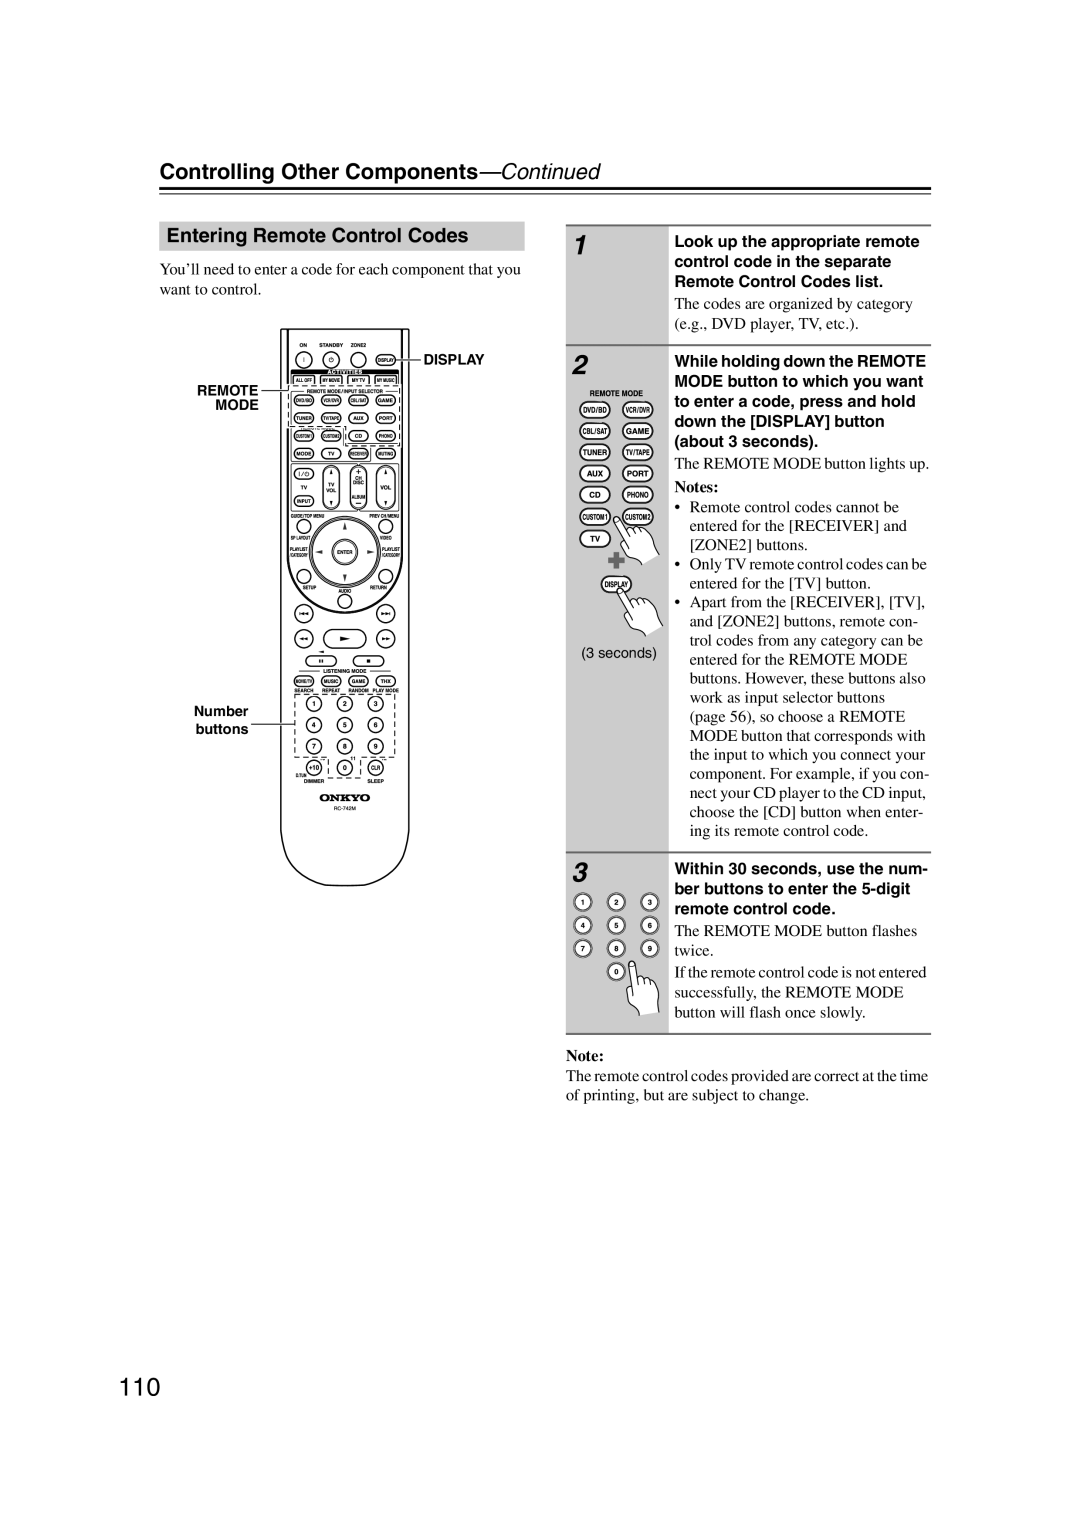 Onkyo TX-SR707 Entering Remote Control Codes, Controlling Other Components—Continued, The codes are organized by category 